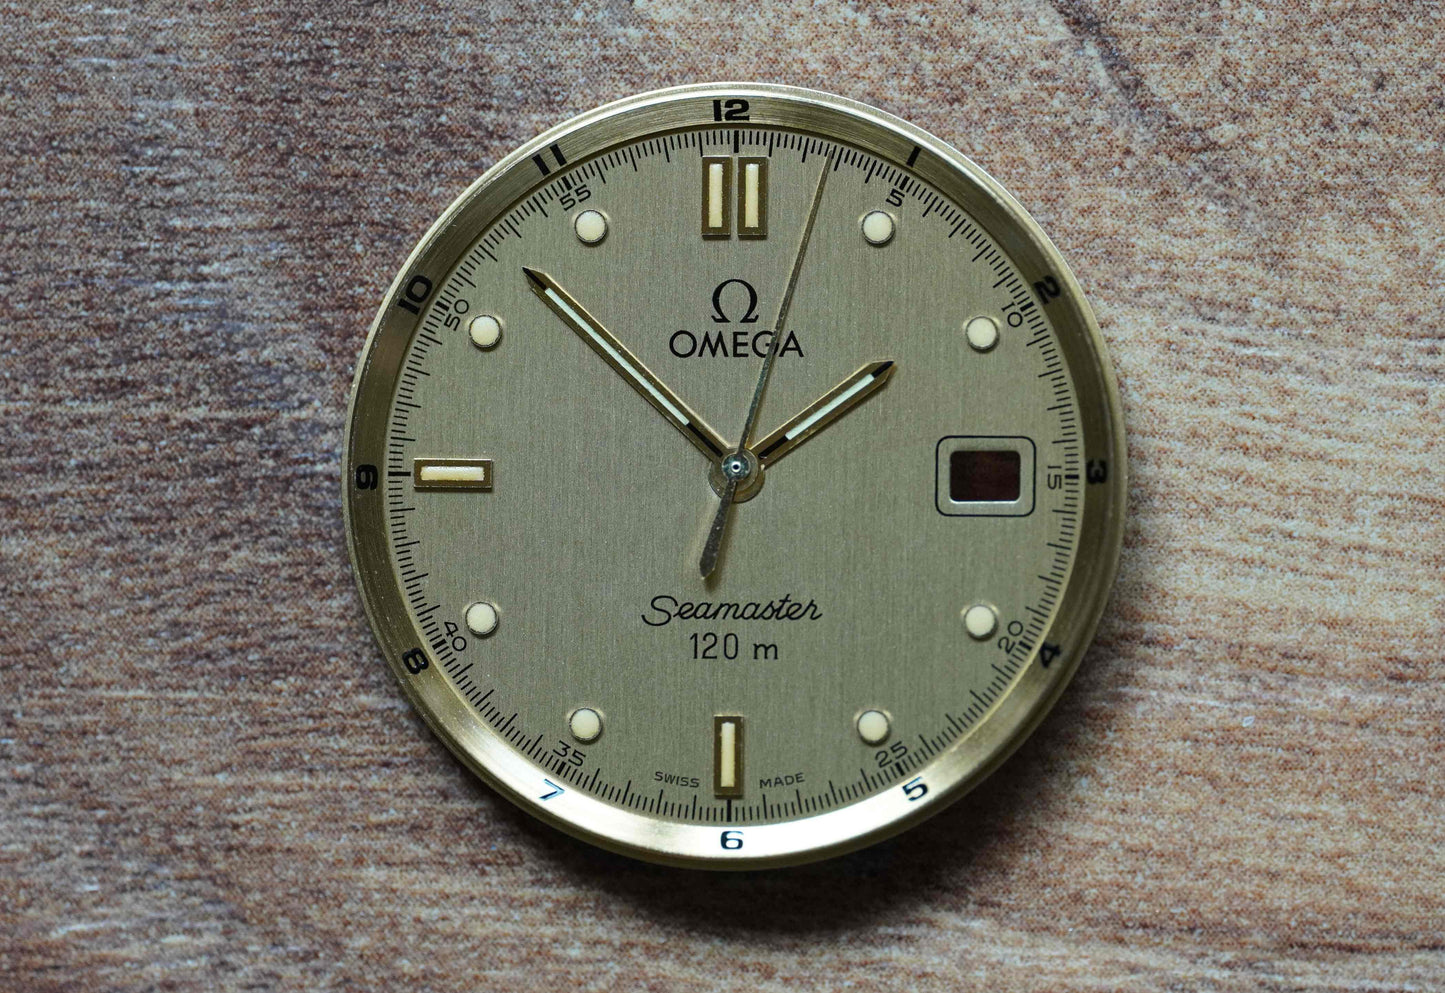 Omega Dial Seamaster 120m - 196.1501 - gold incl. gold hands